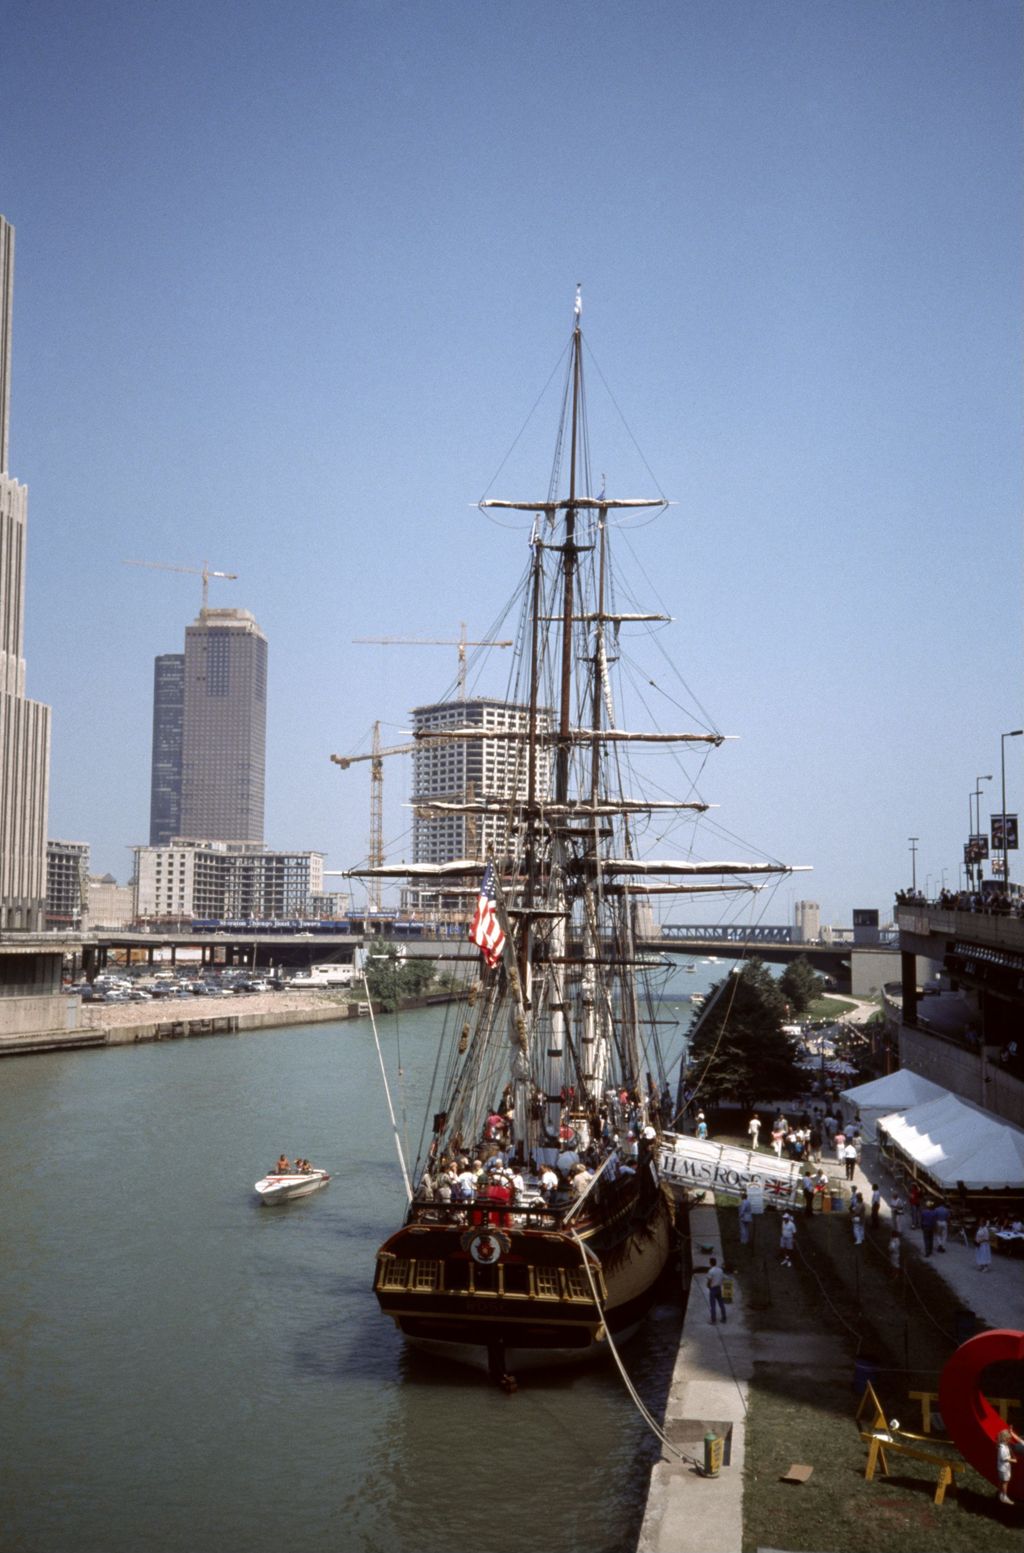 HMS Rose moored on the Chicago River